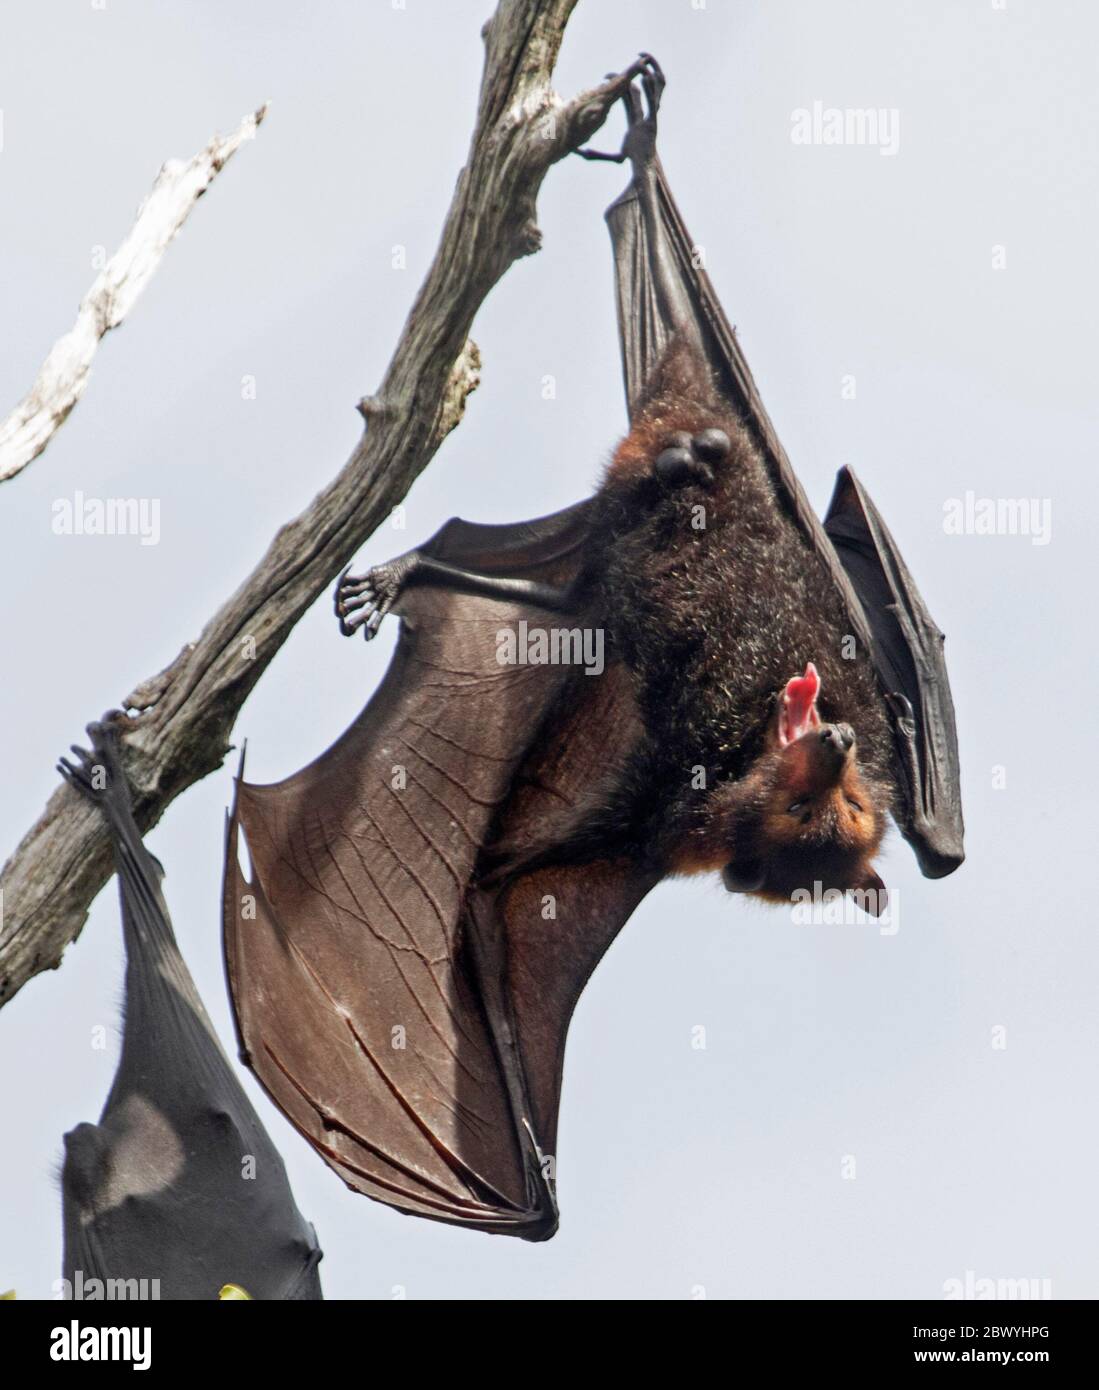 Australian grey-headed flying fox / fruit bat, Pteropus poliocephalus, hanging from branch of tree with wings extended and mouth open Stock Photo